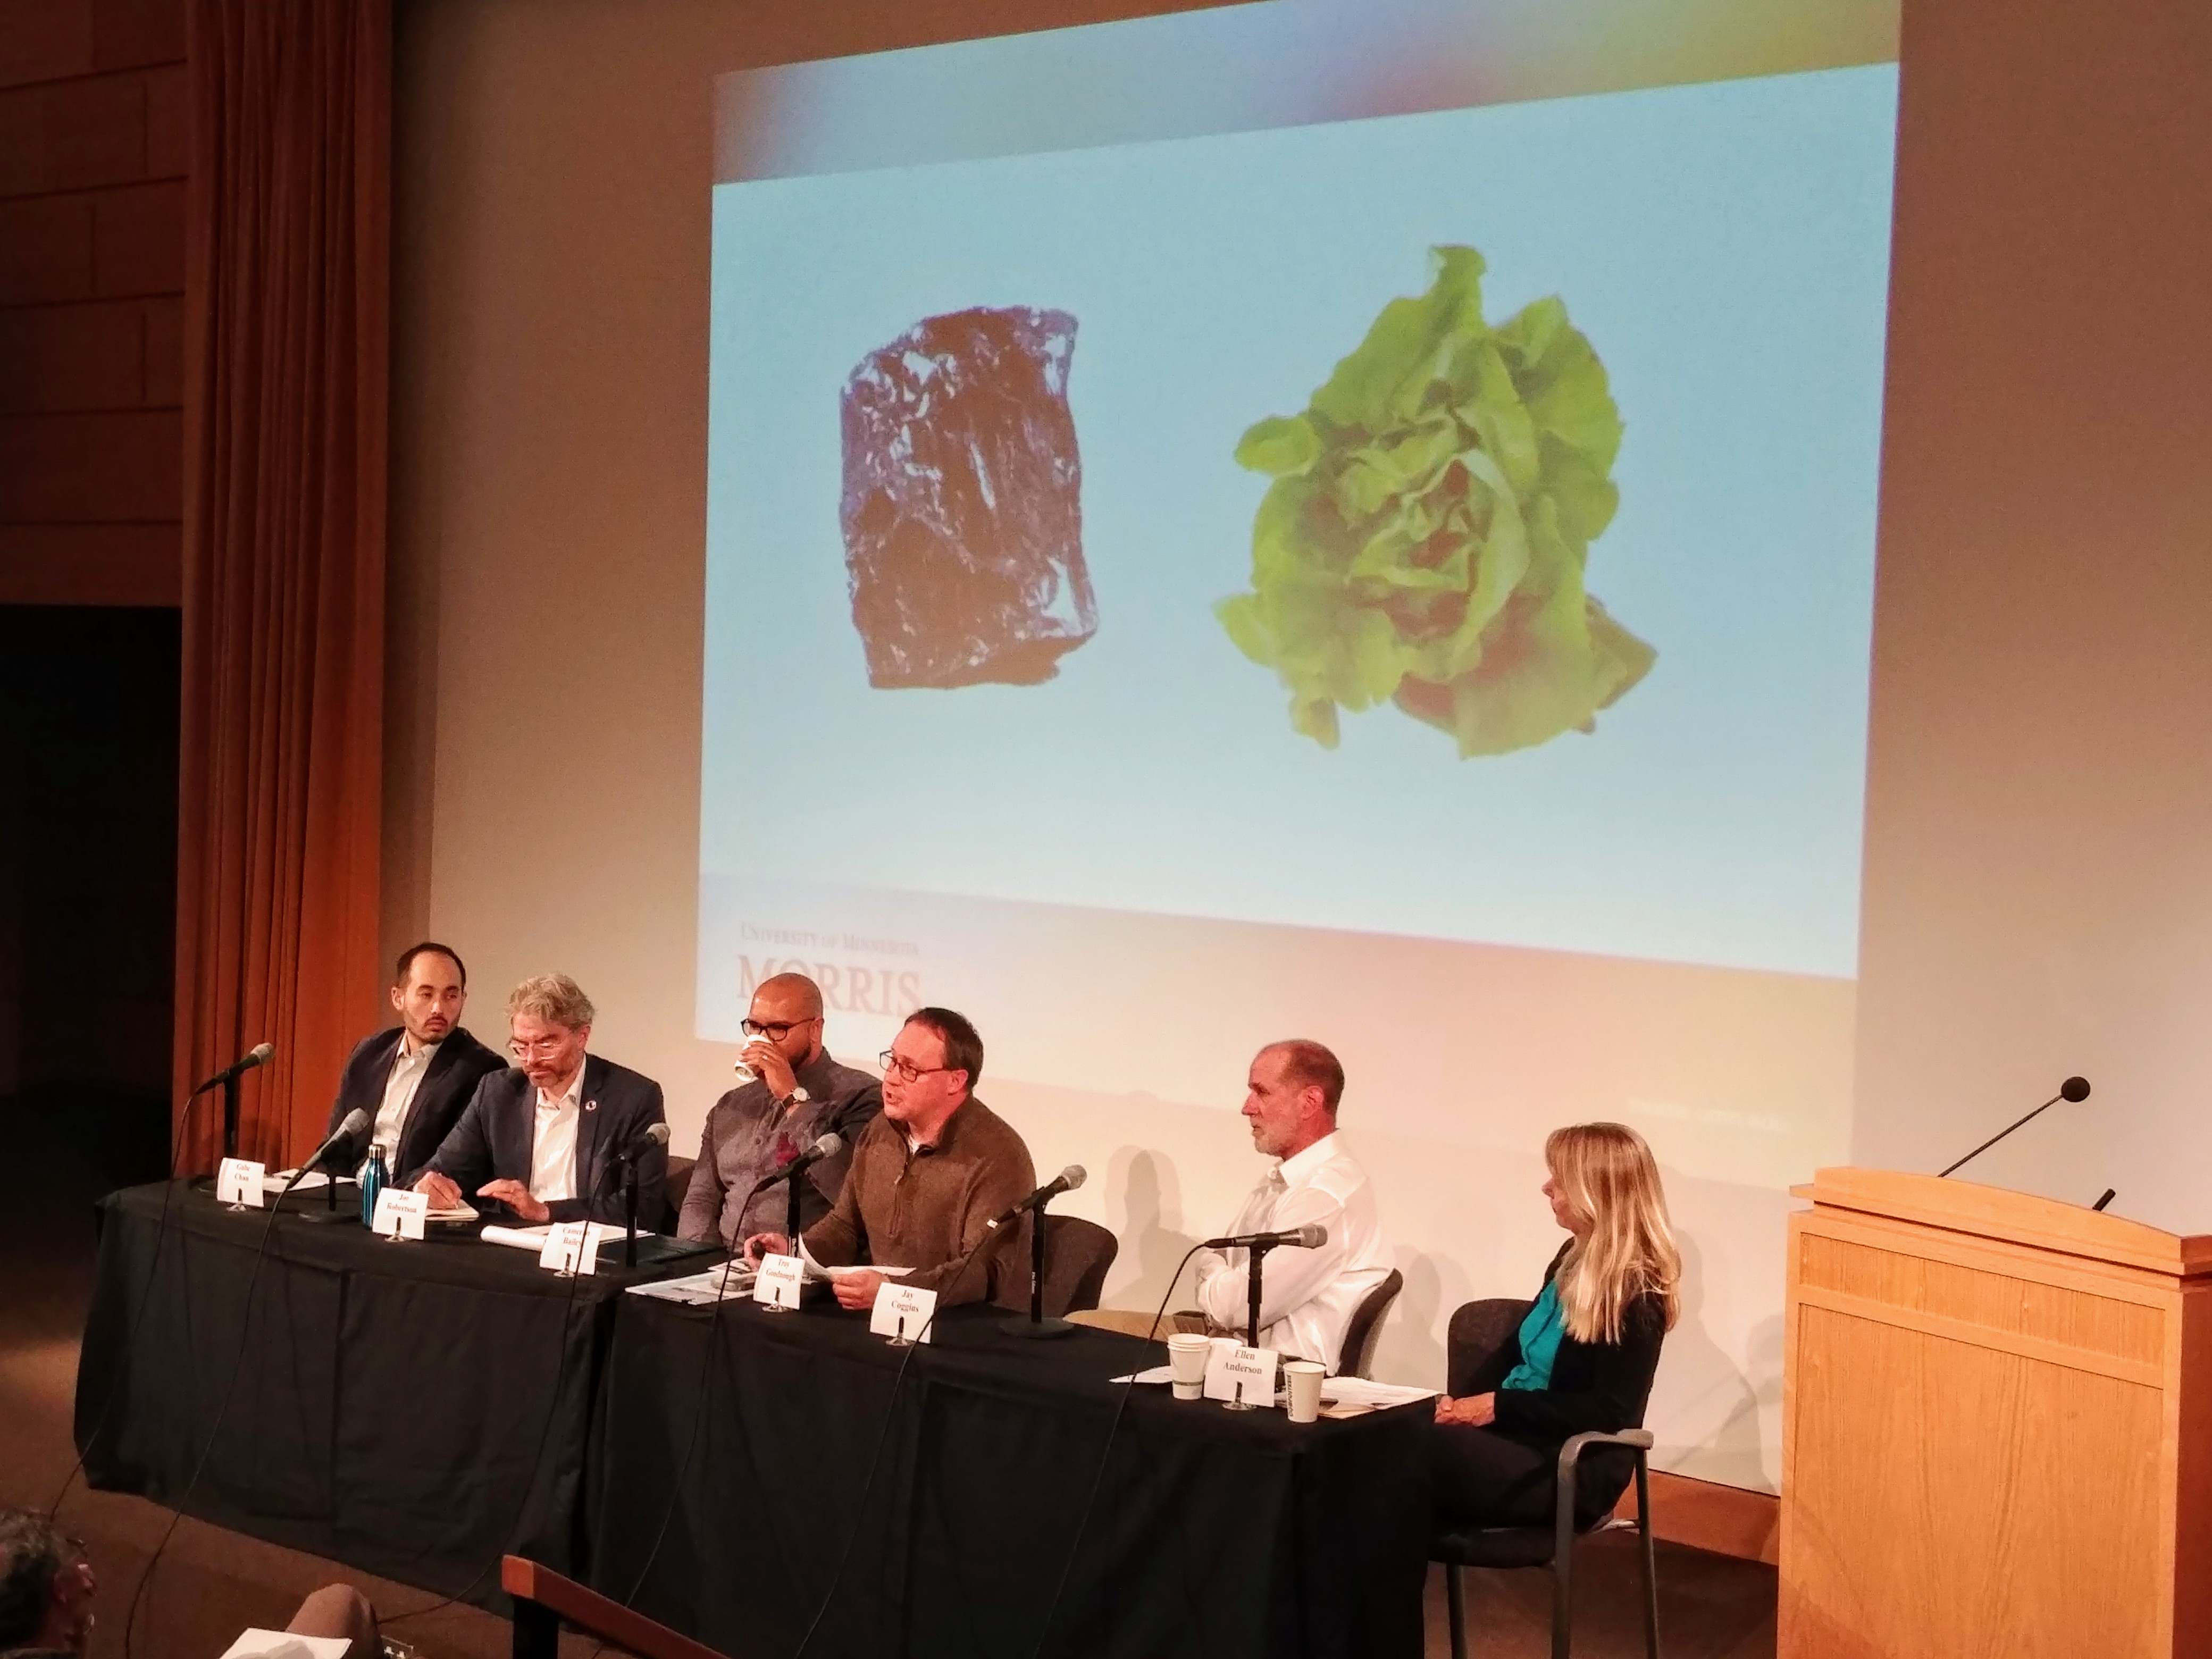 A panel of five members in Cowels Auditorium discusses climate change. There are 5 men (panelists) and one woman (moderator). Behind them is a slide showing, enigmatically, a wad of tin foil and a ball of lettuce.